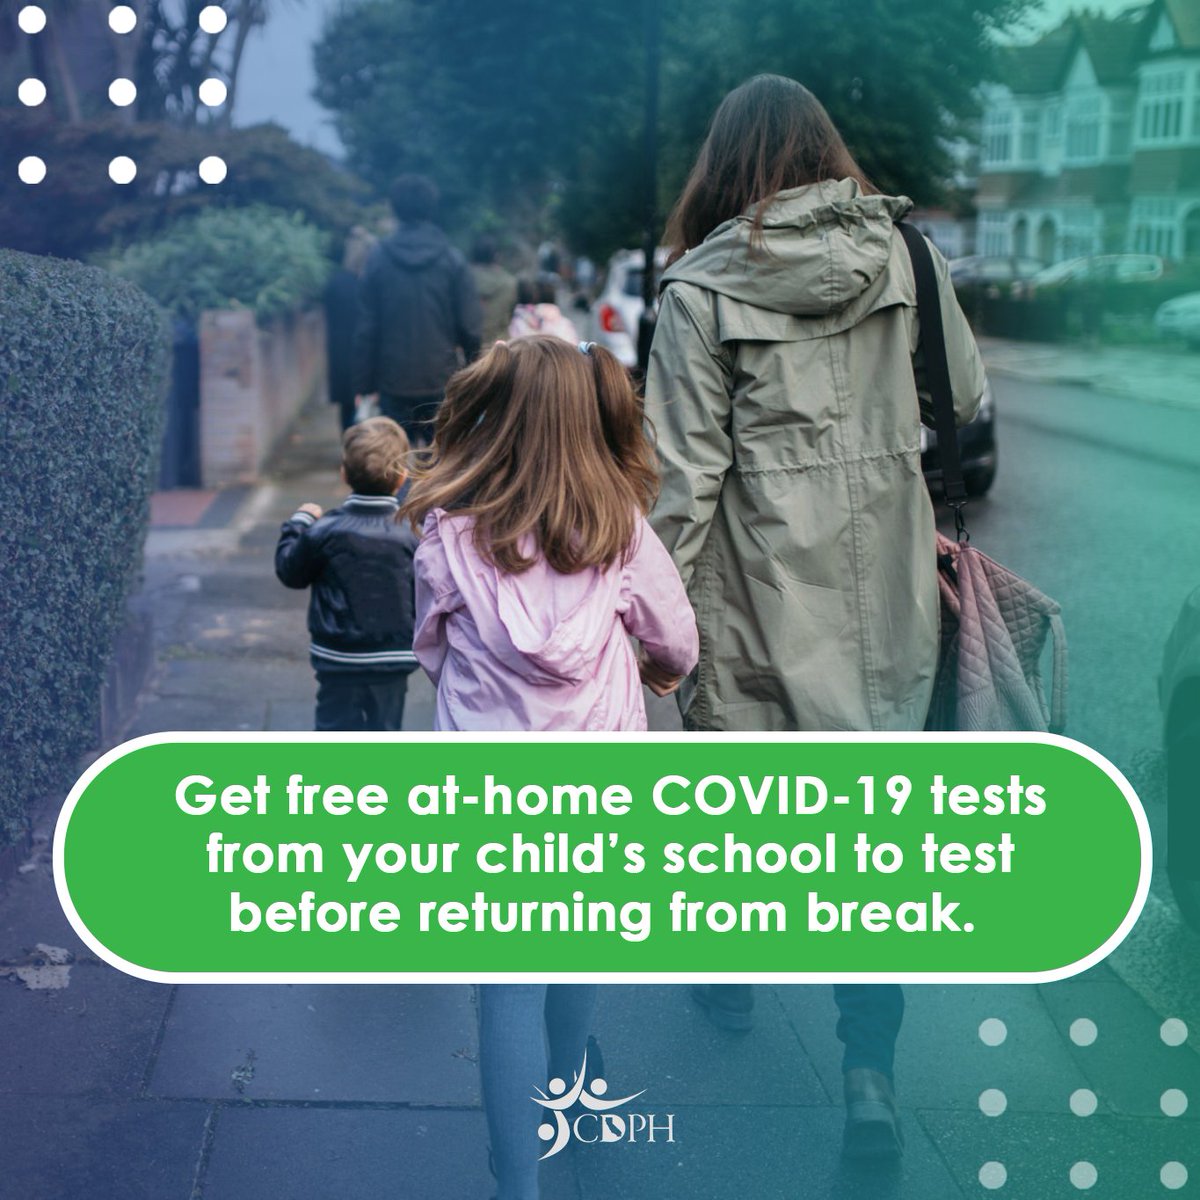 California is providing free at-home COVID-19 tests to K-12 schools in California to be used before returning from winter break. Contact your school to learn about the #OTCCOVID19Testing program.     
Learn about CA schools schools.covid19.ca.gov 
@CADeptEd